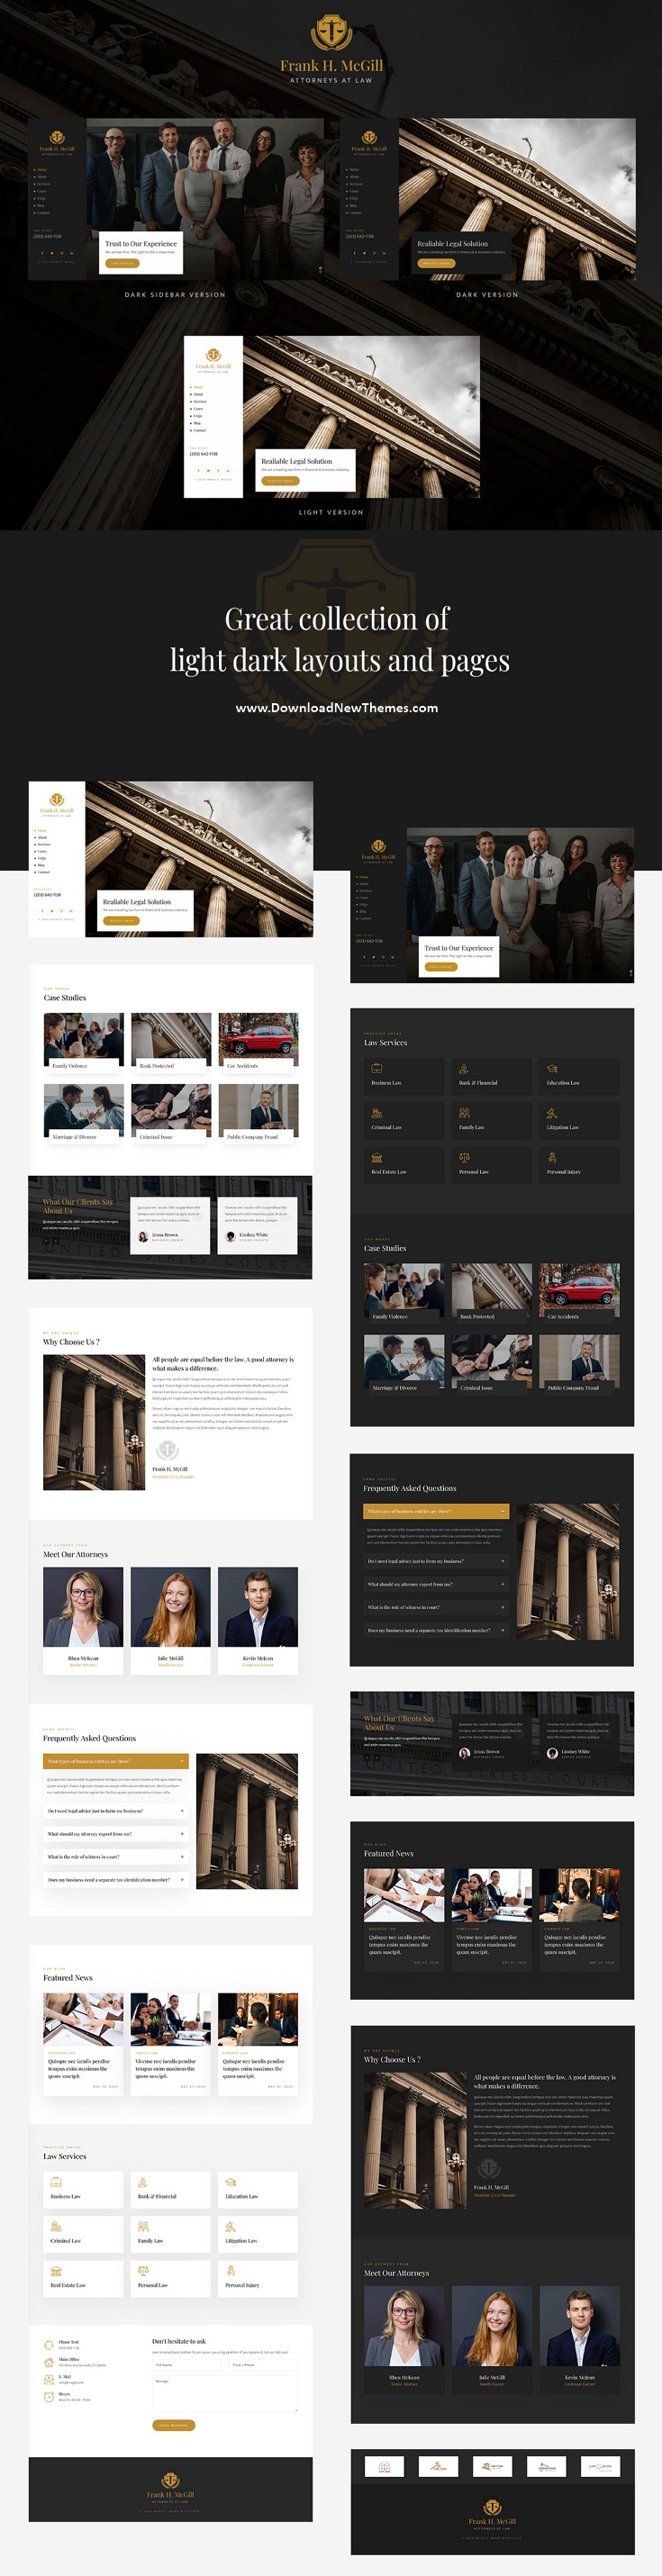 McGill - Lawyers Attorneys and Law Firm WordPress Theme Review